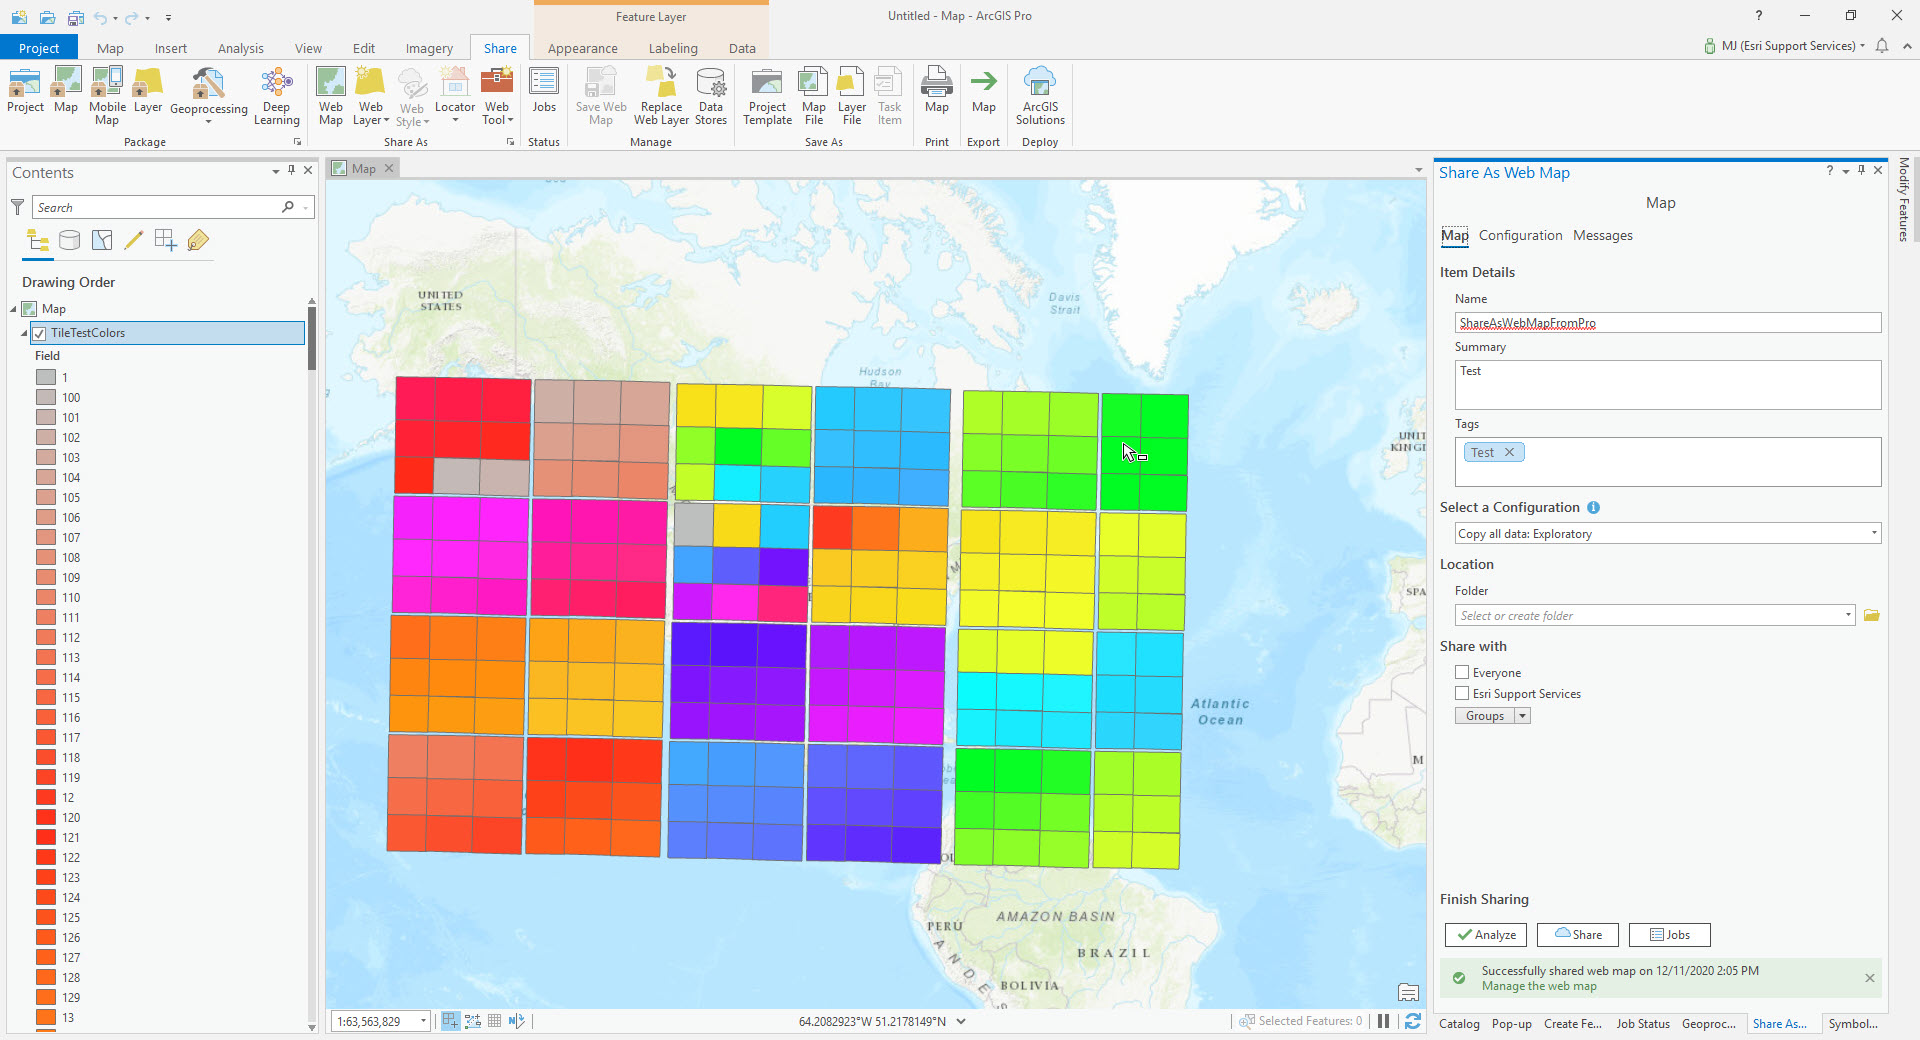 Layer with more than 200 unique values represented by more than 10 unique colors in ArcGIS Pro